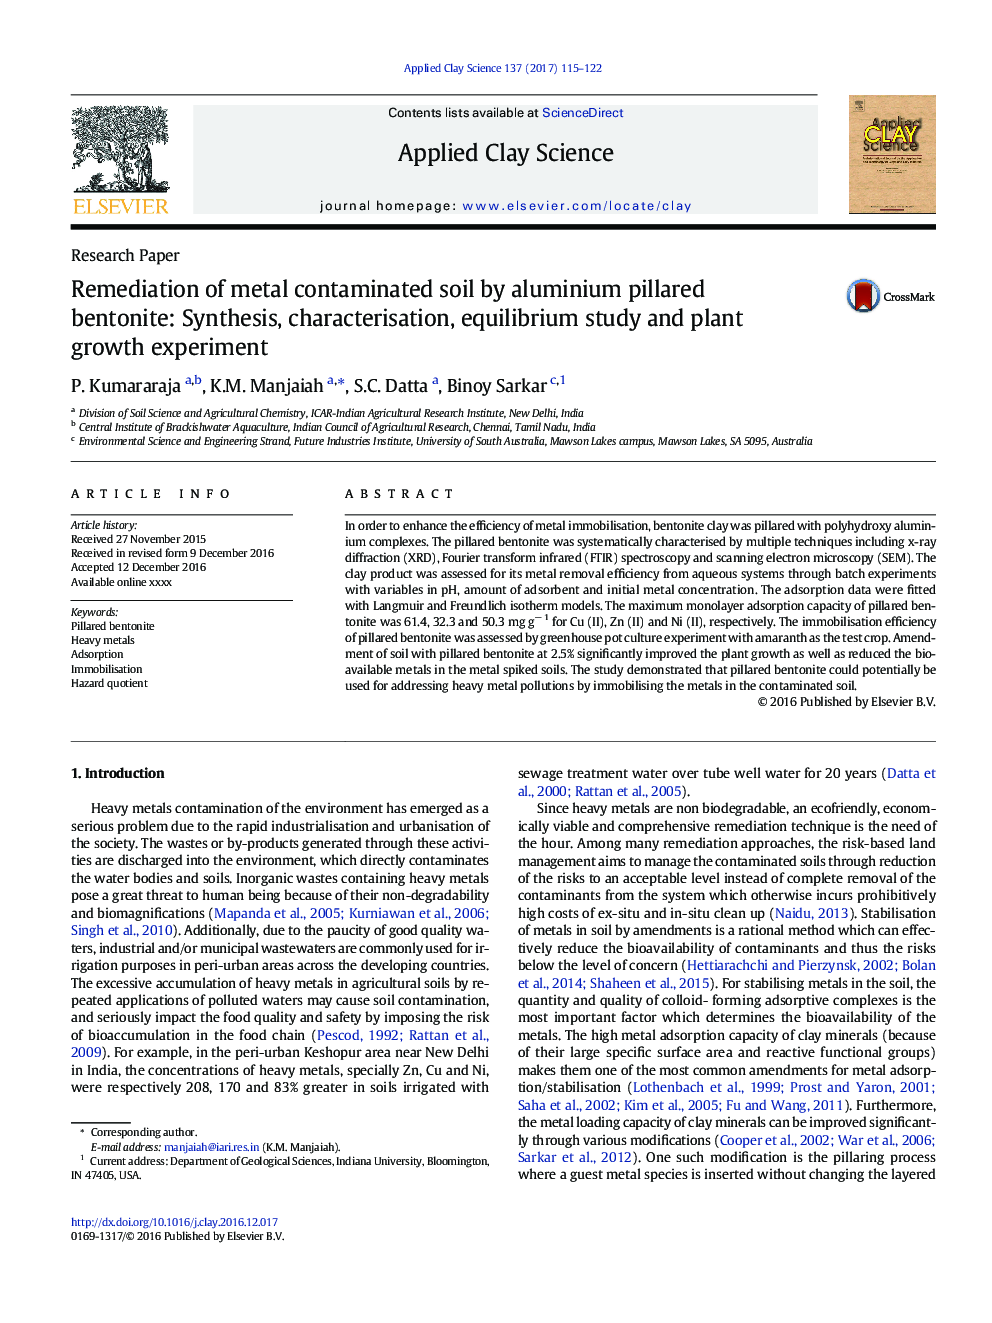 Remediation of metal contaminated soil by aluminium pillared bentonite: Synthesis, characterisation, equilibrium study and plant growth experiment